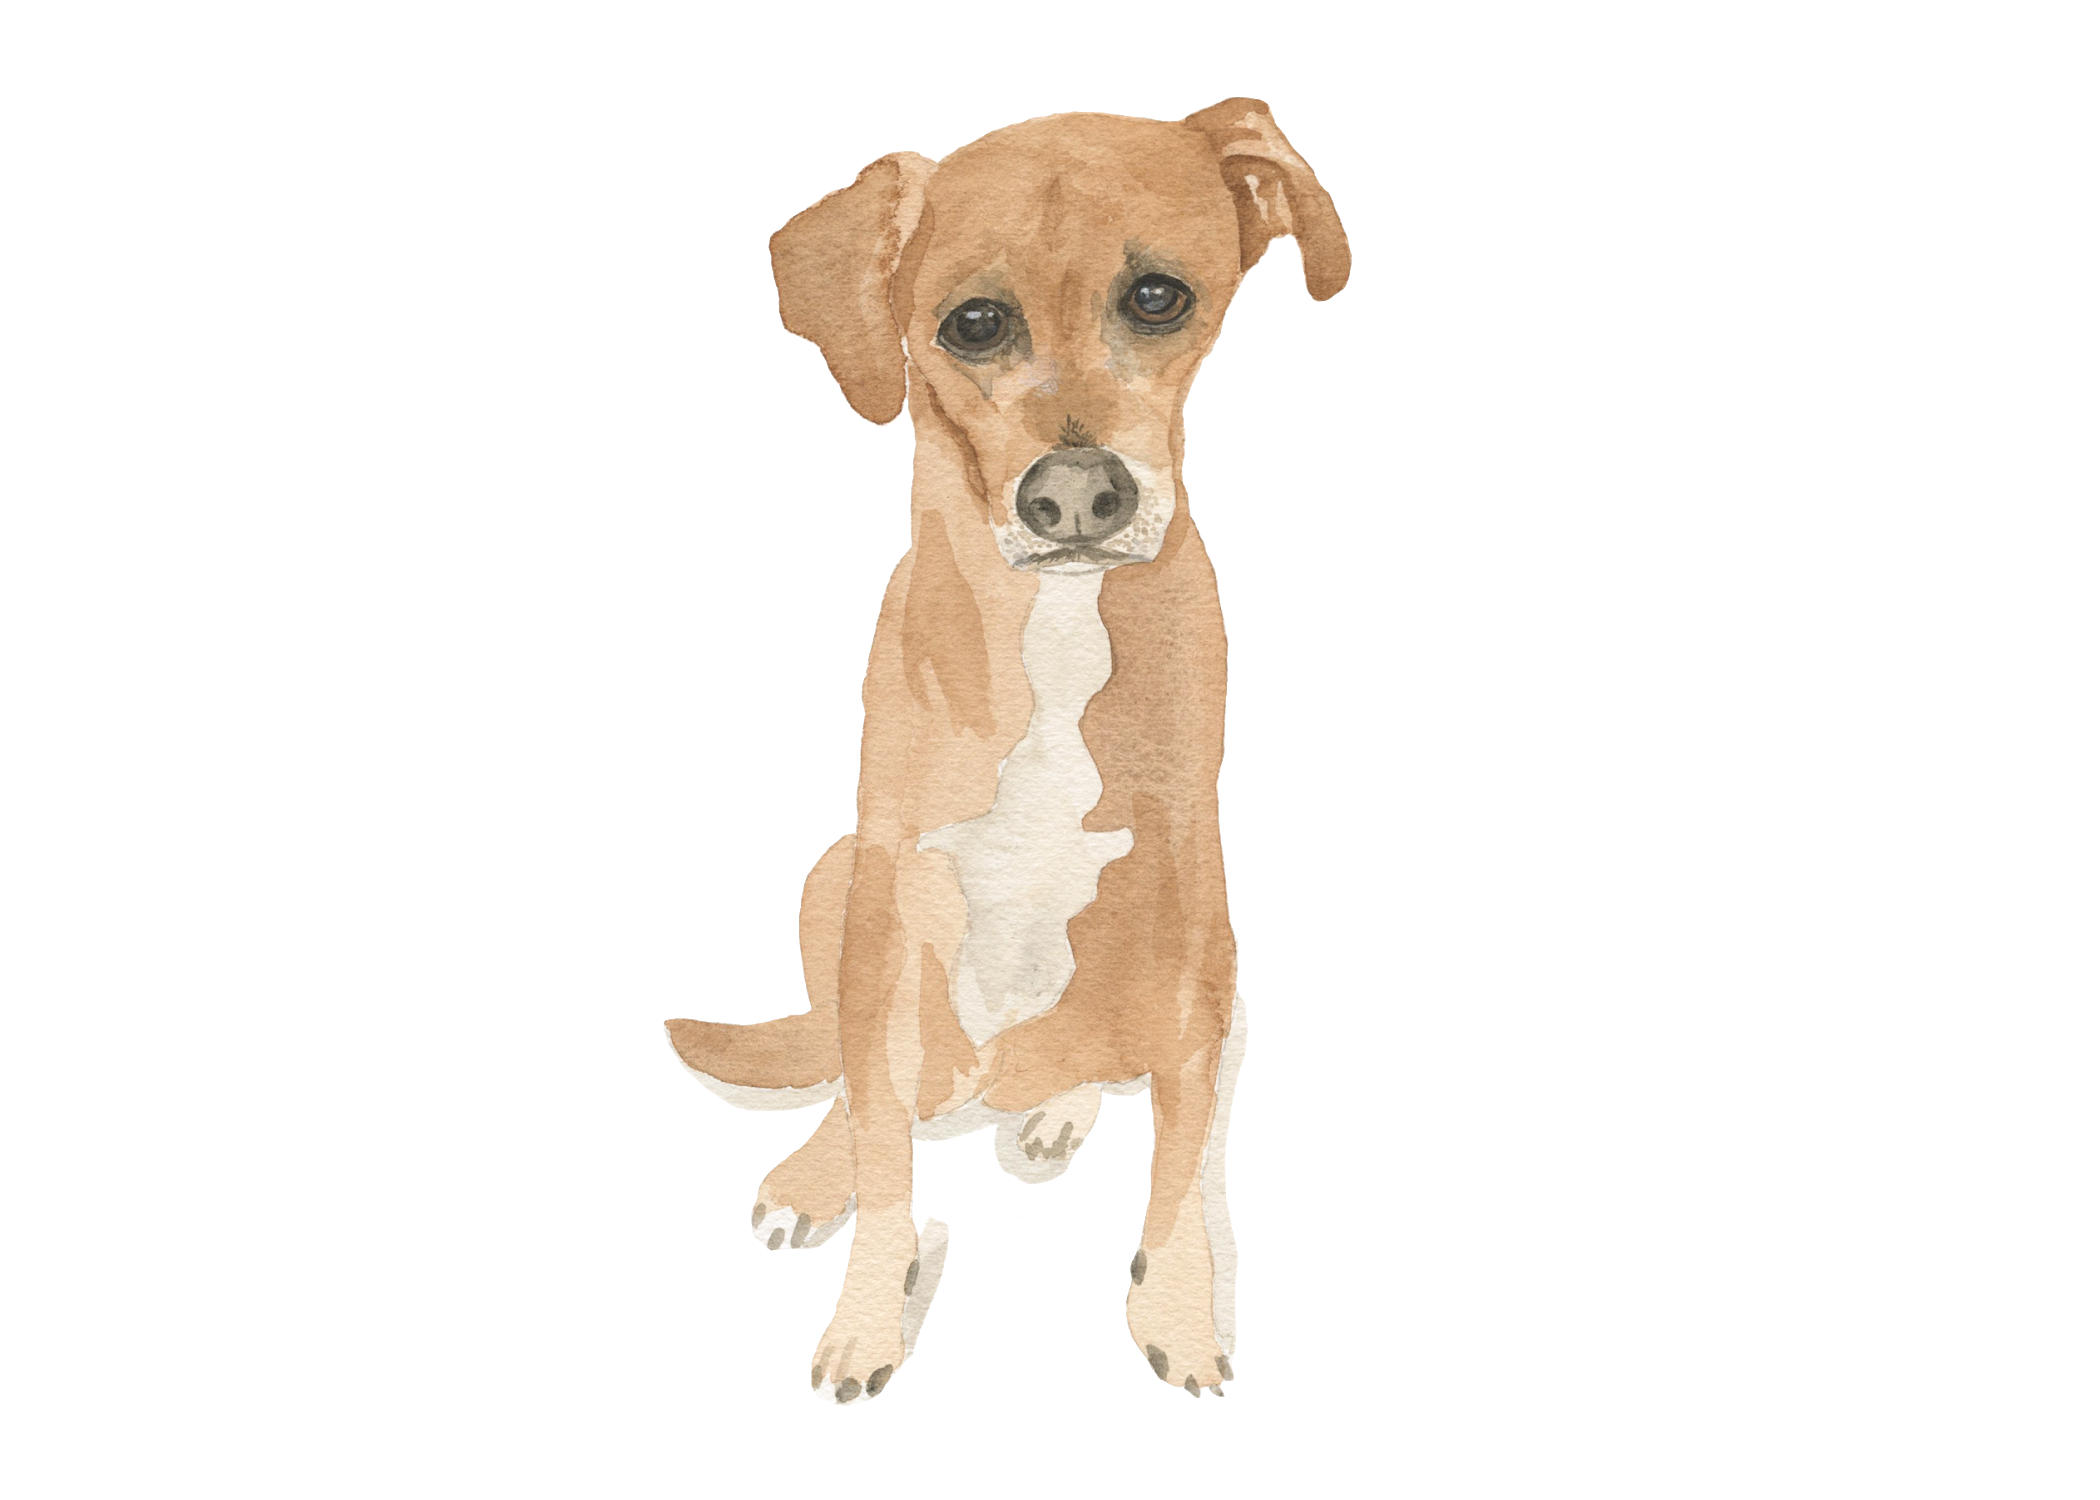 A rescue pup watercolor portrait by Alicia Betz of The Welcoming District.